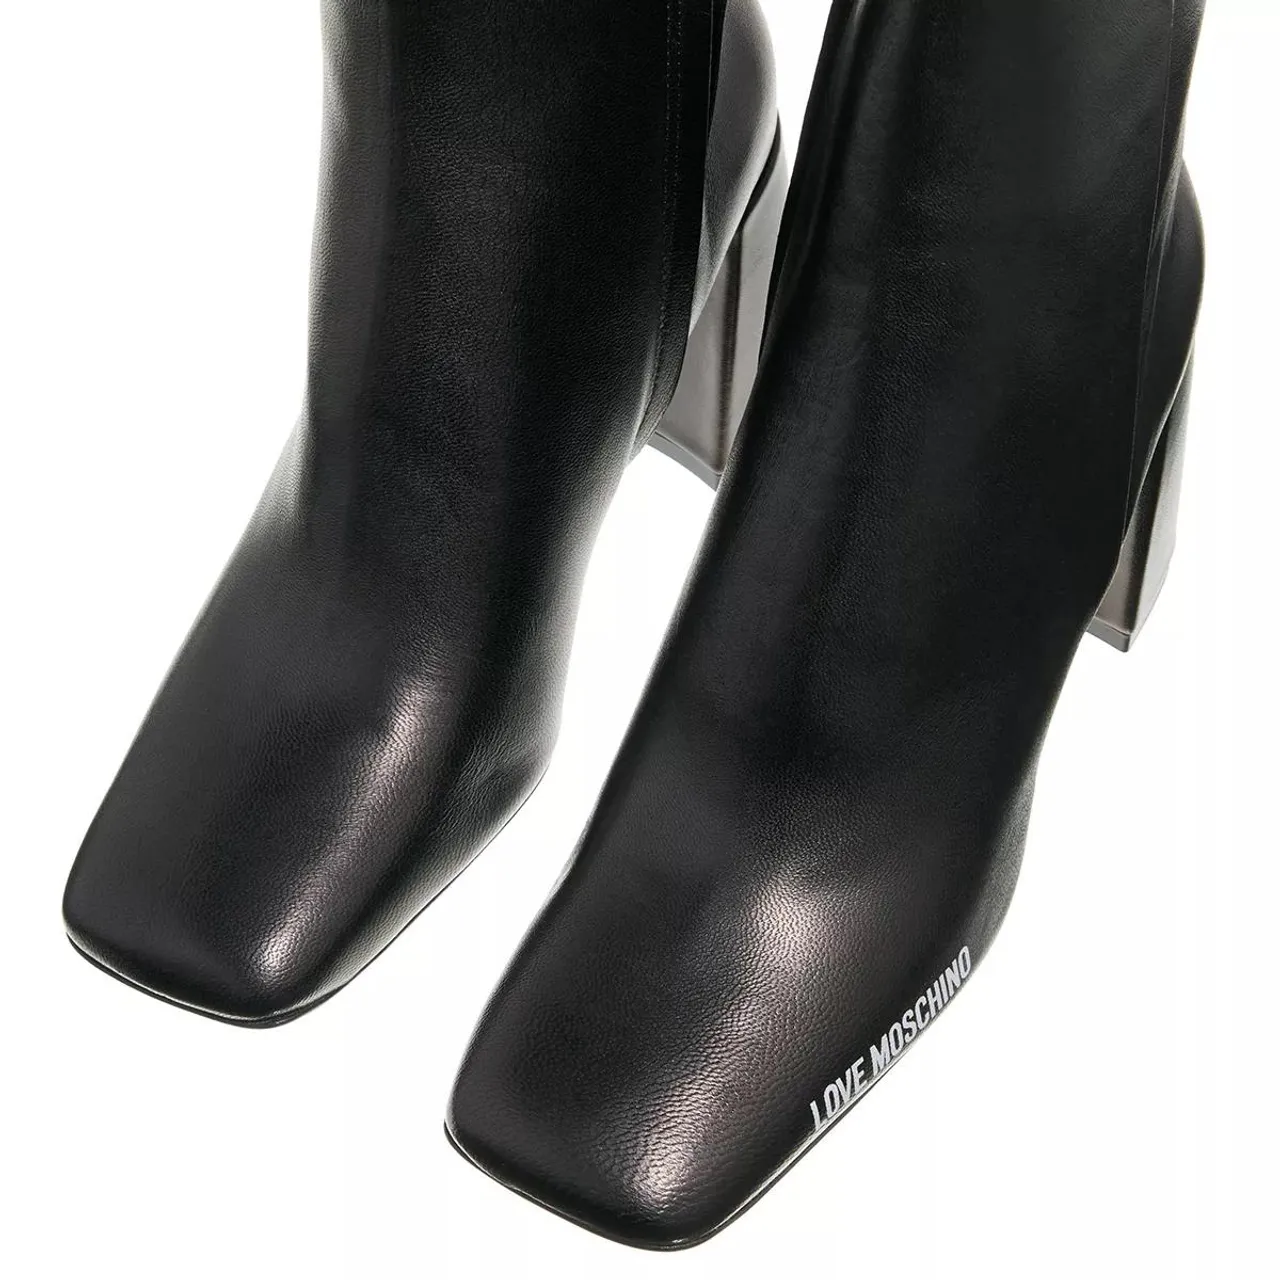 Love Moschino Boots & Ankle Boots - Rubber Logo - black - Boots & Ankle Boots for ladies